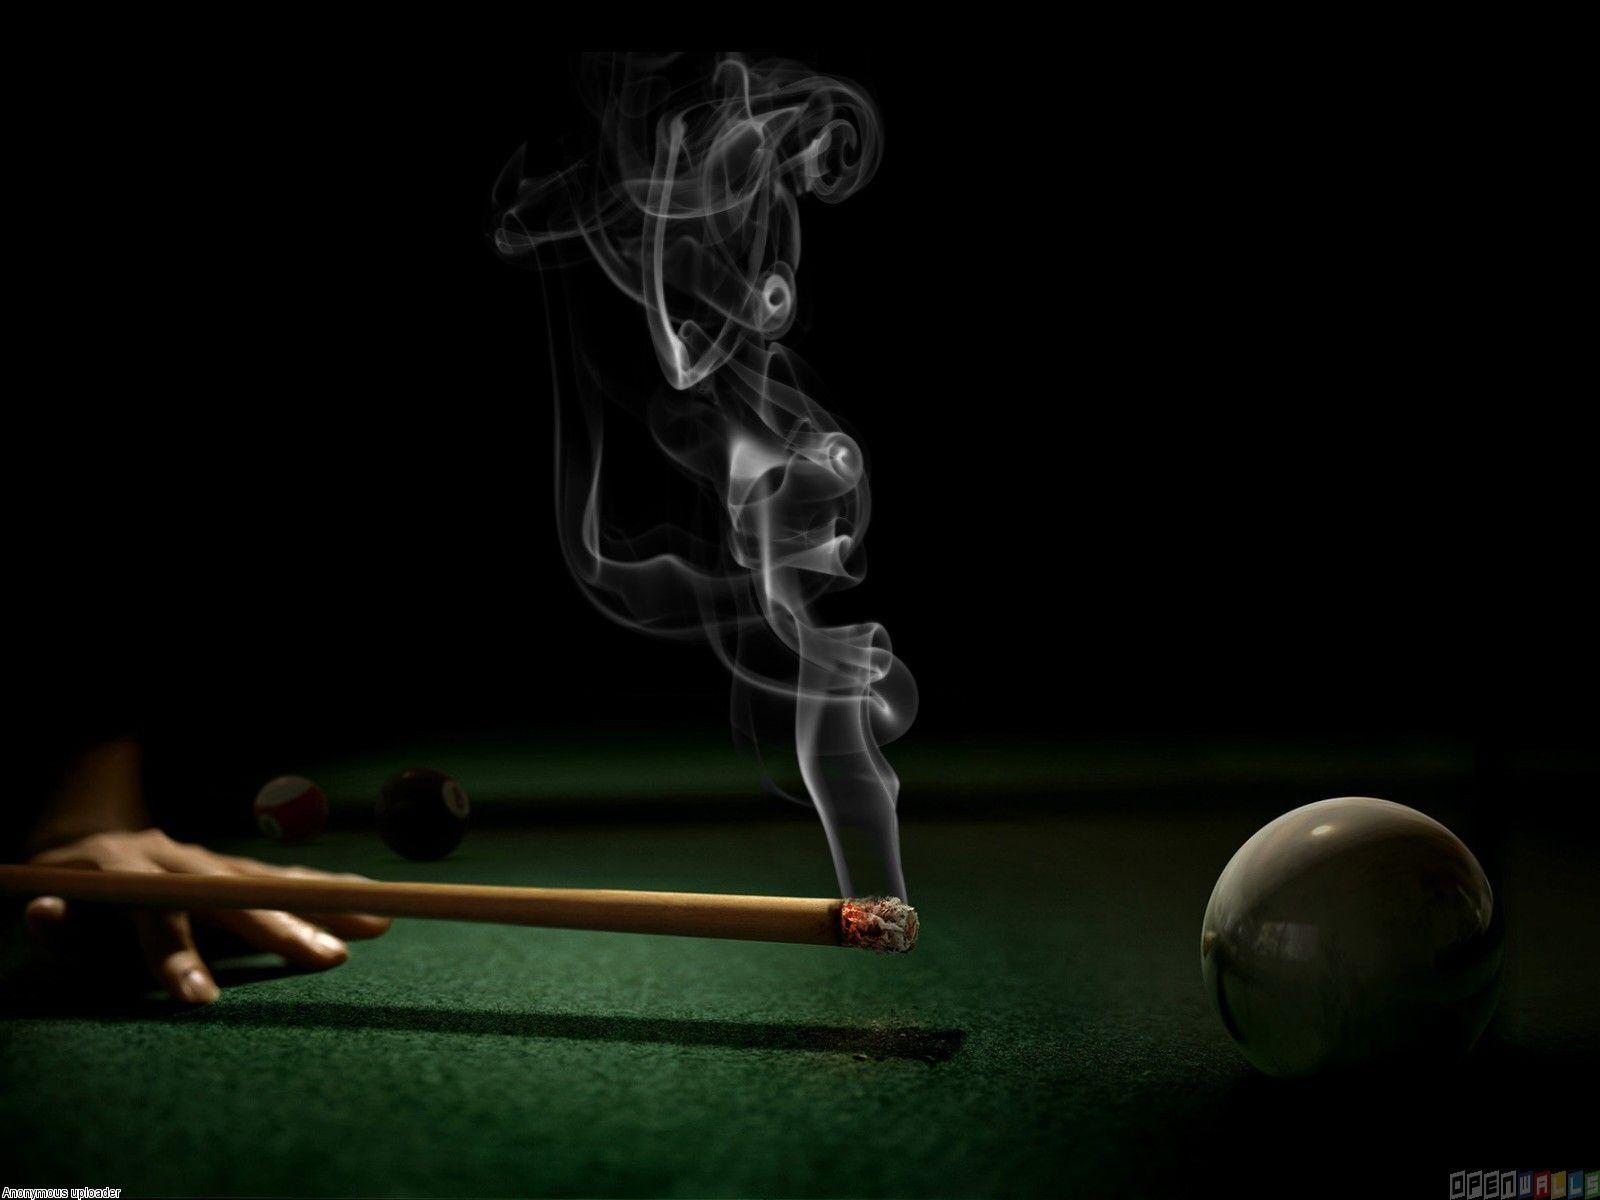 Billiards Table HD Wallpaper, Background Image